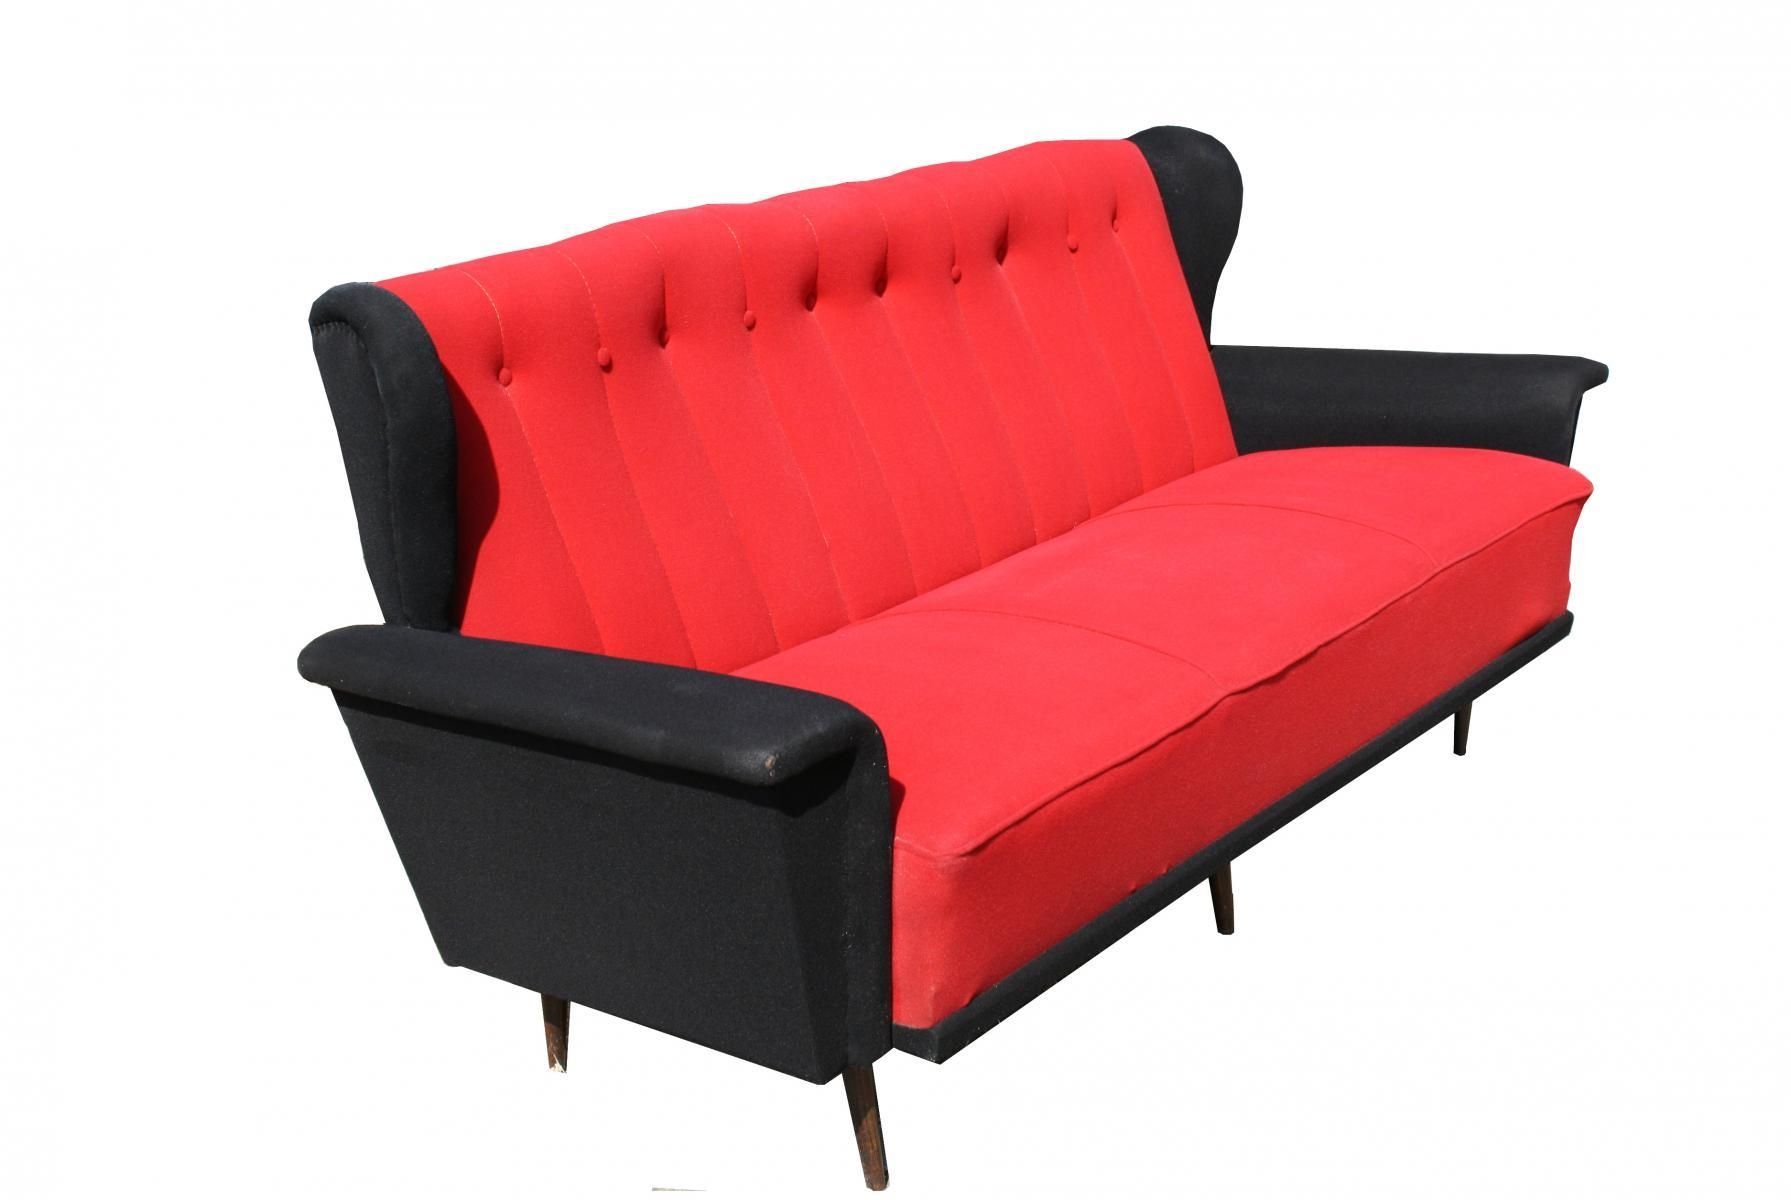 Vintage Red & Black Sofa, 1950S For Sale At Pamono Pertaining To Sofa Red And Black (View 20 of 20)